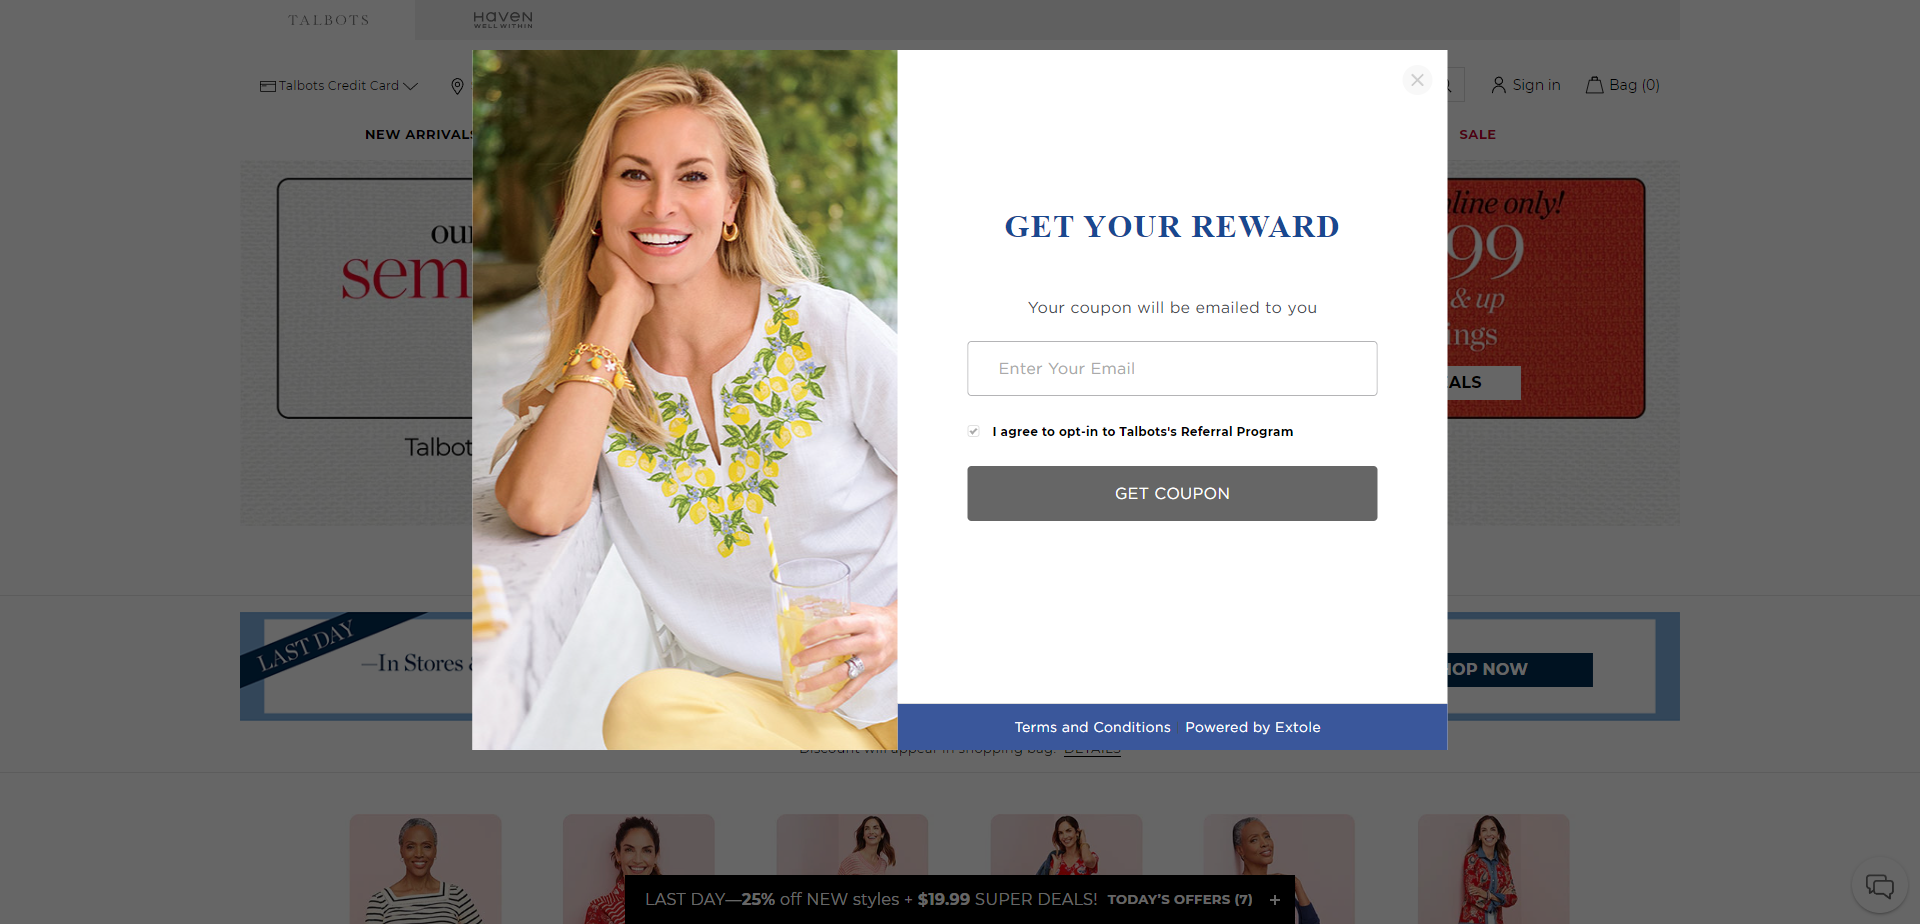 Referral Landing Page for Talbots